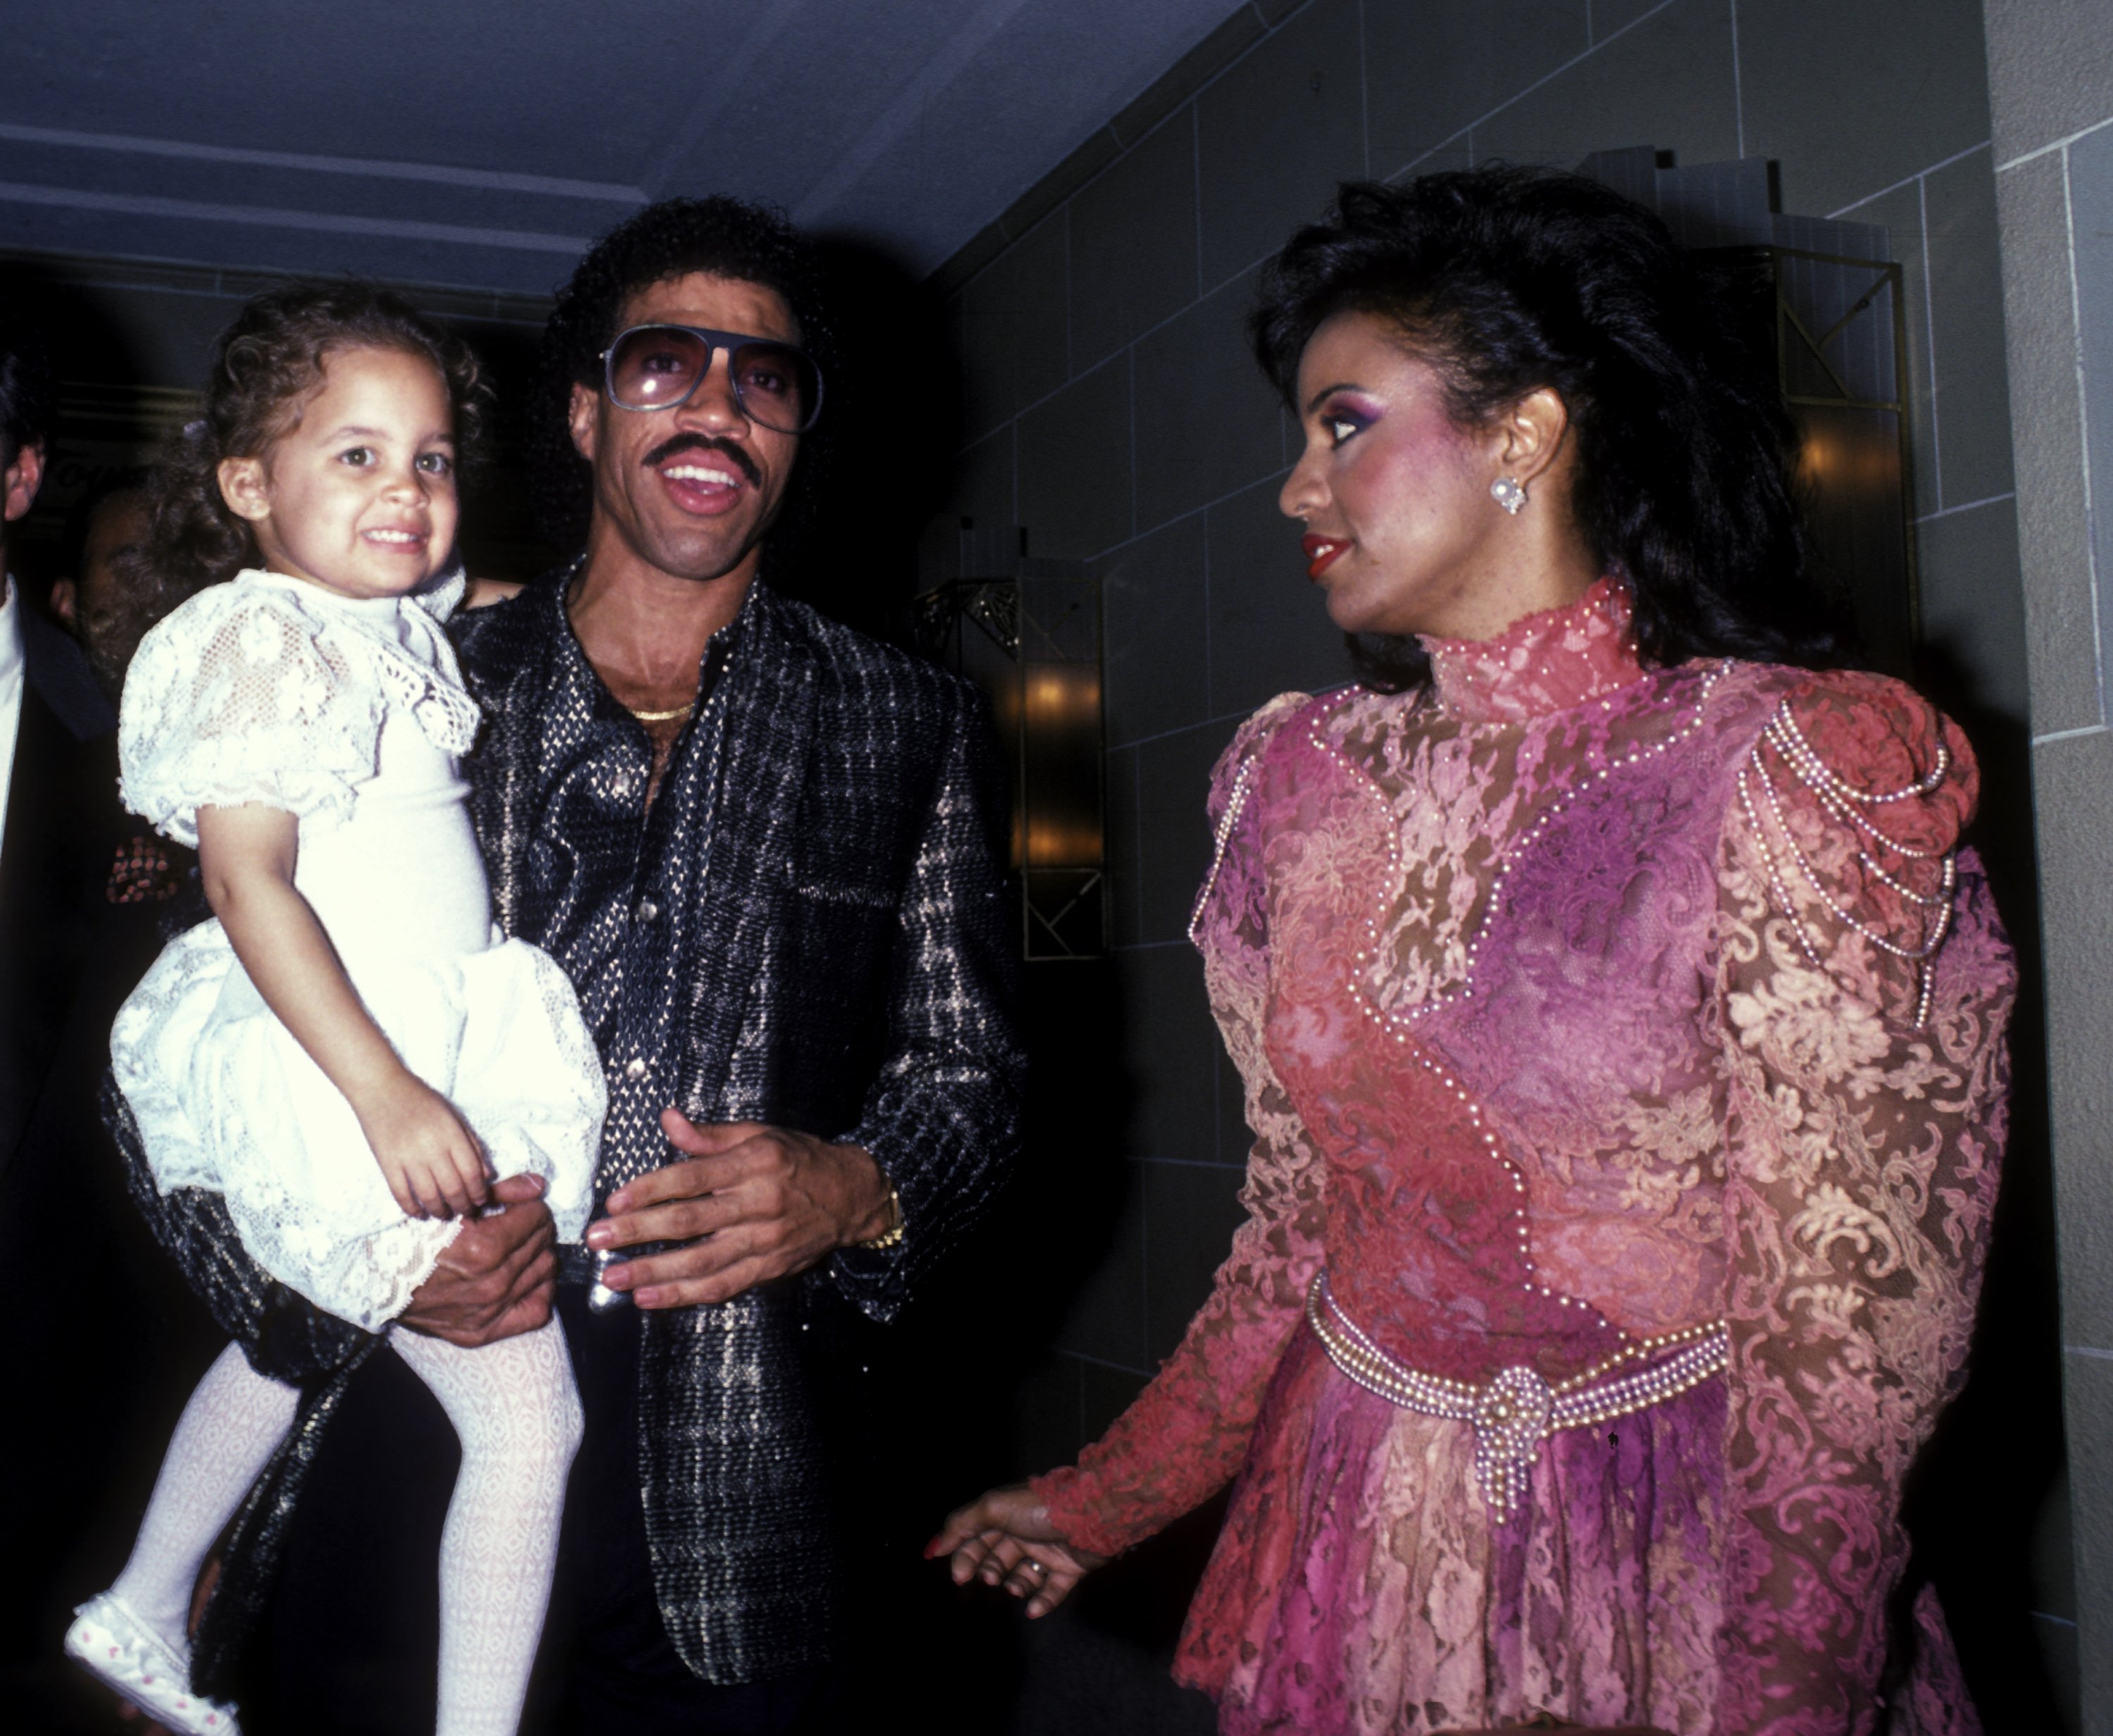 Nicole Richie and Lionel Richie and Brenda Harvey in New York 1985. | Source: Getty Images